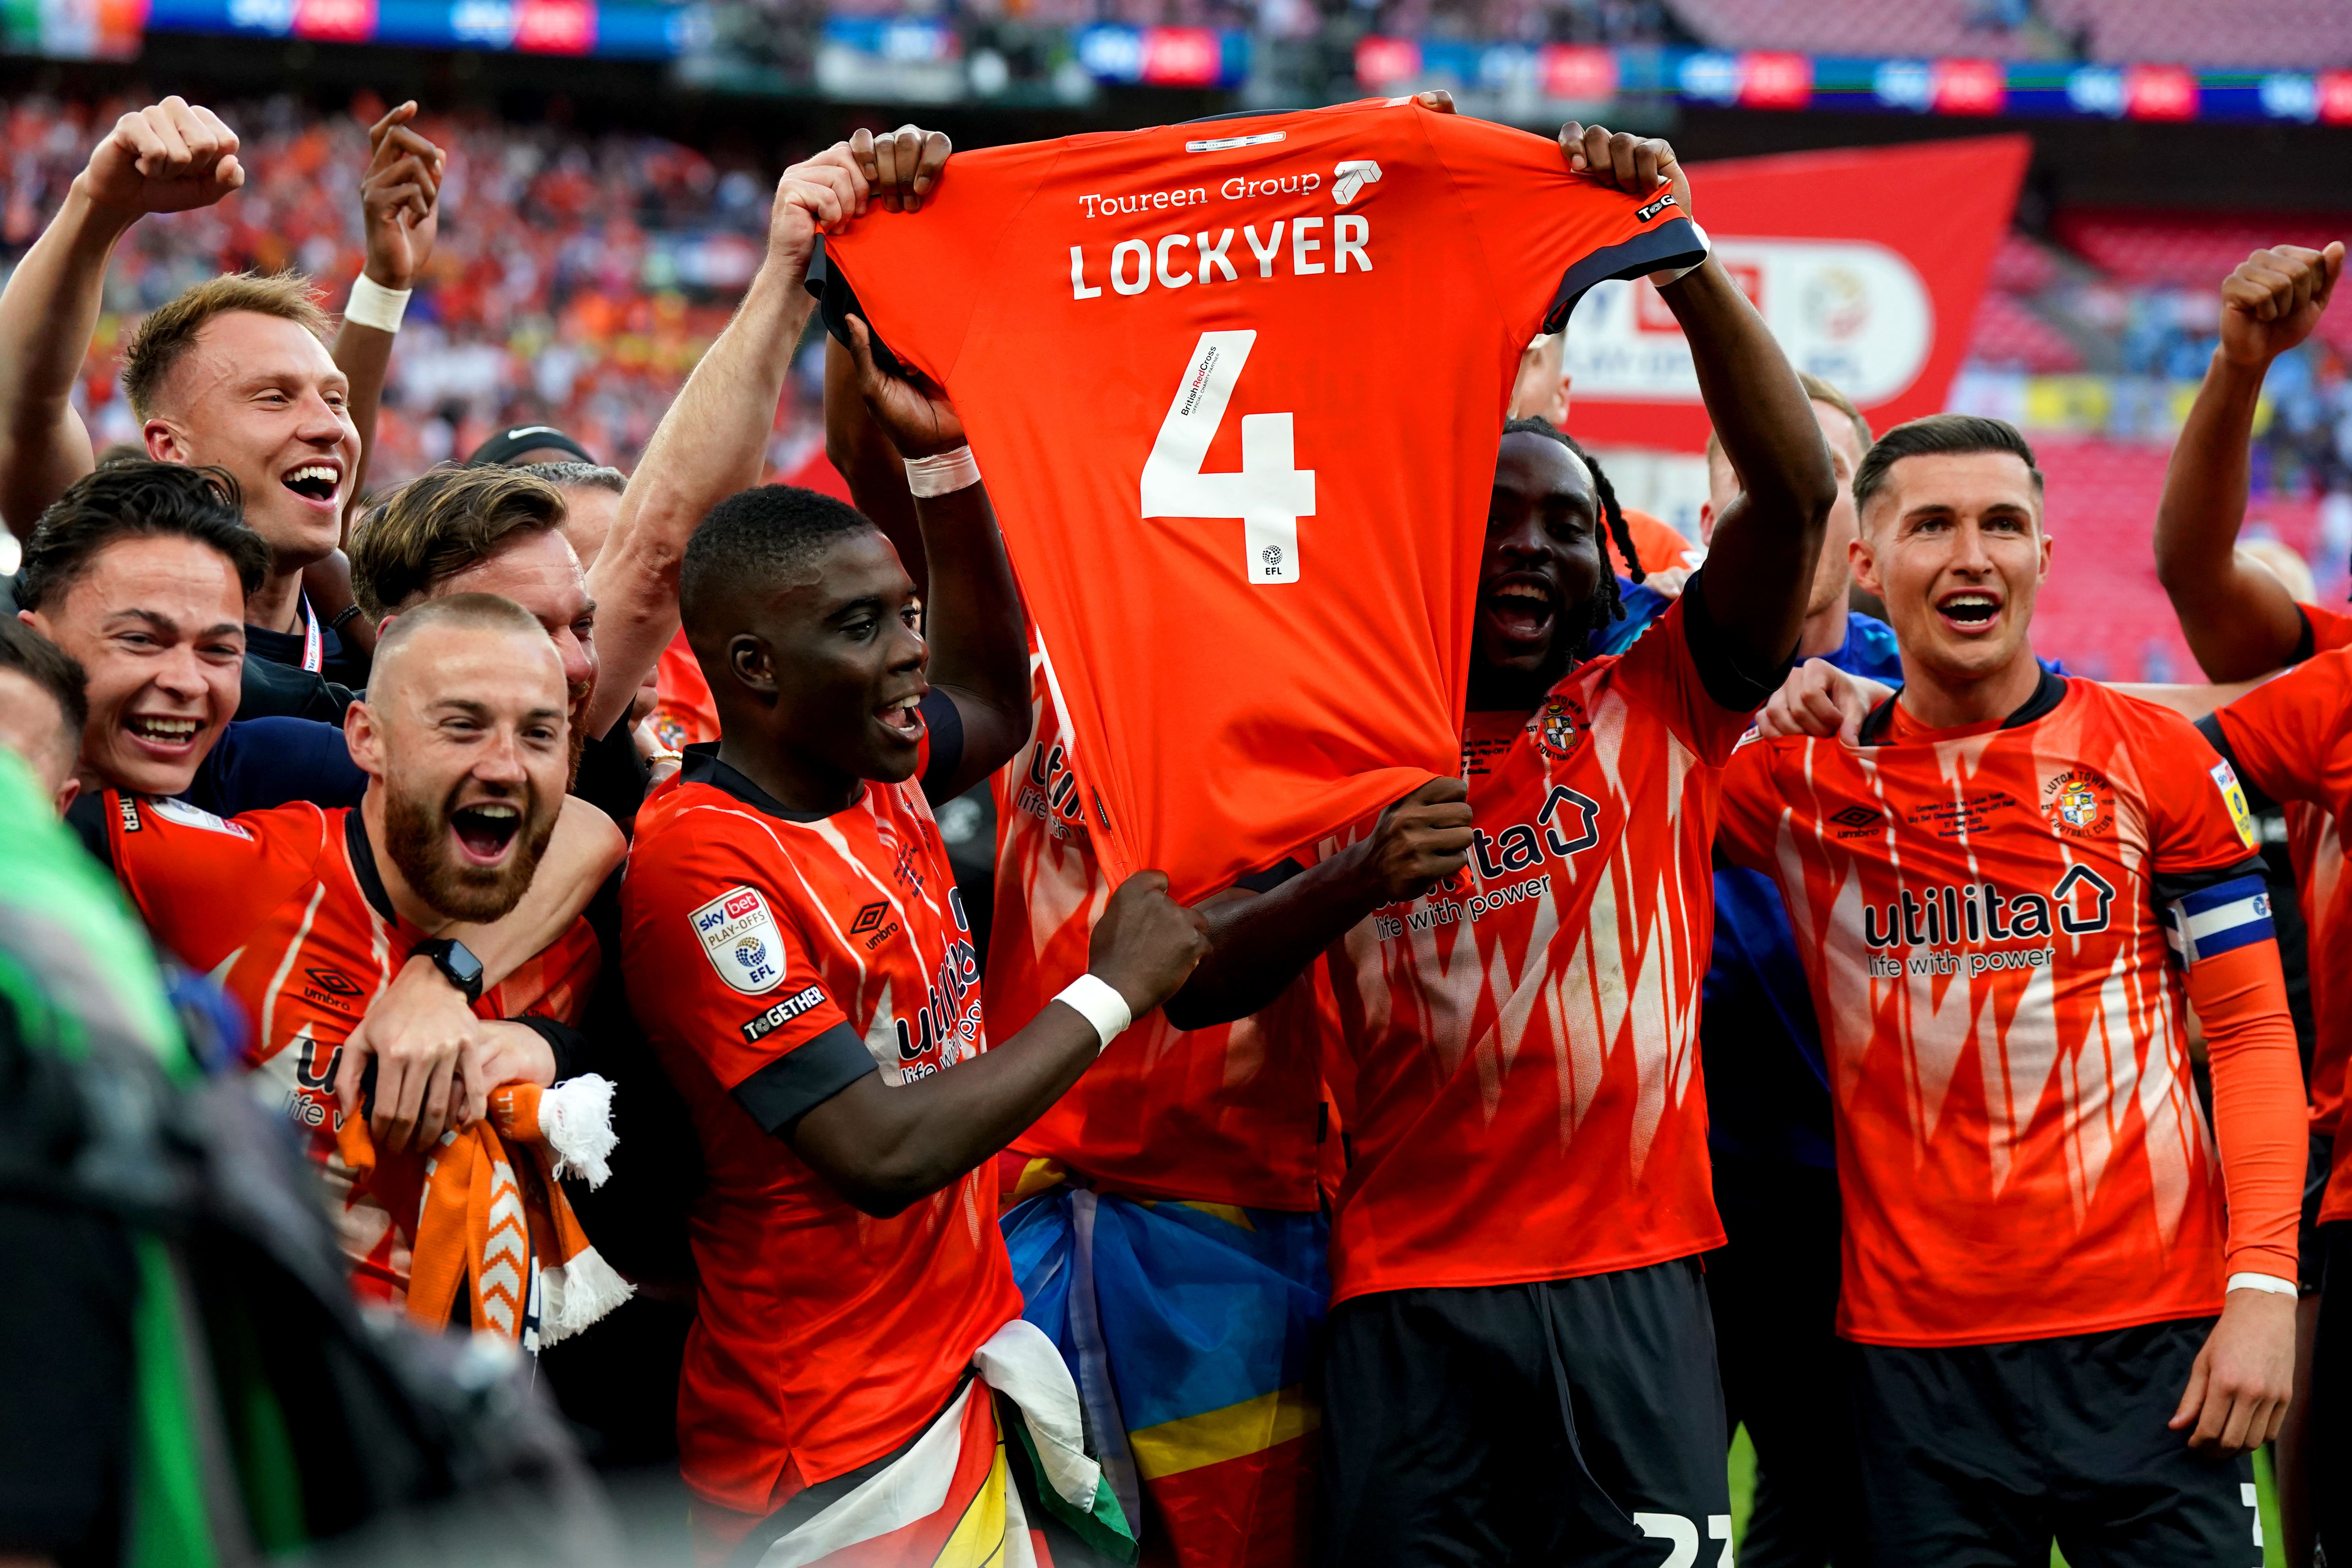 Luton’s Championship play-off final win was a moment of joy